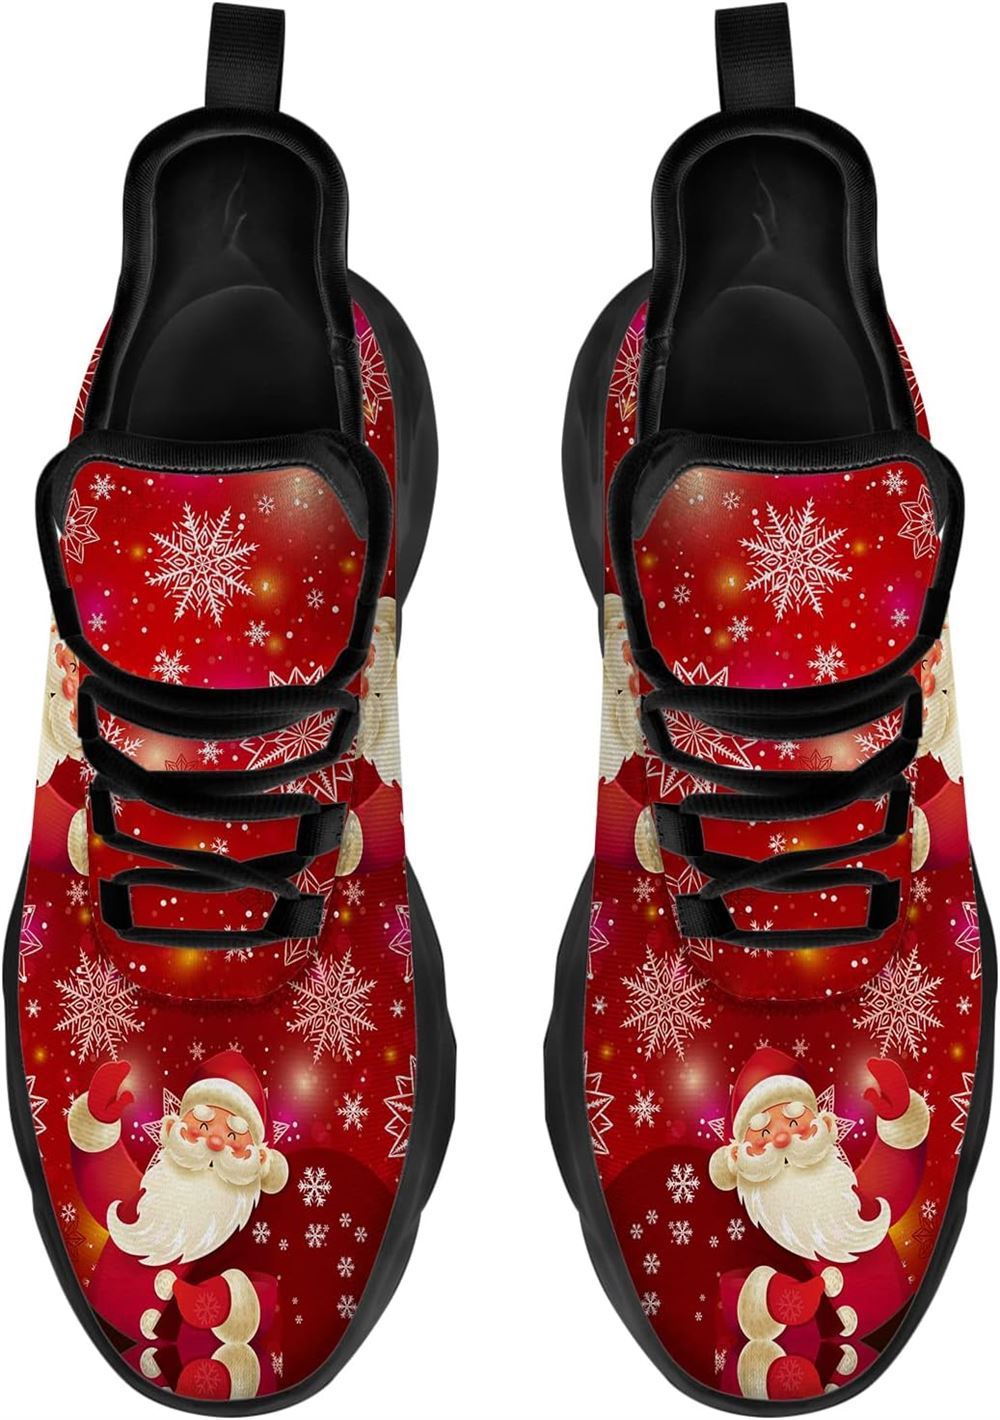 Happy Santa Claus Max Soul Shoes For Men & Women, Best Running Shoes, Christmas Shoes Gift, Winter Sneakers